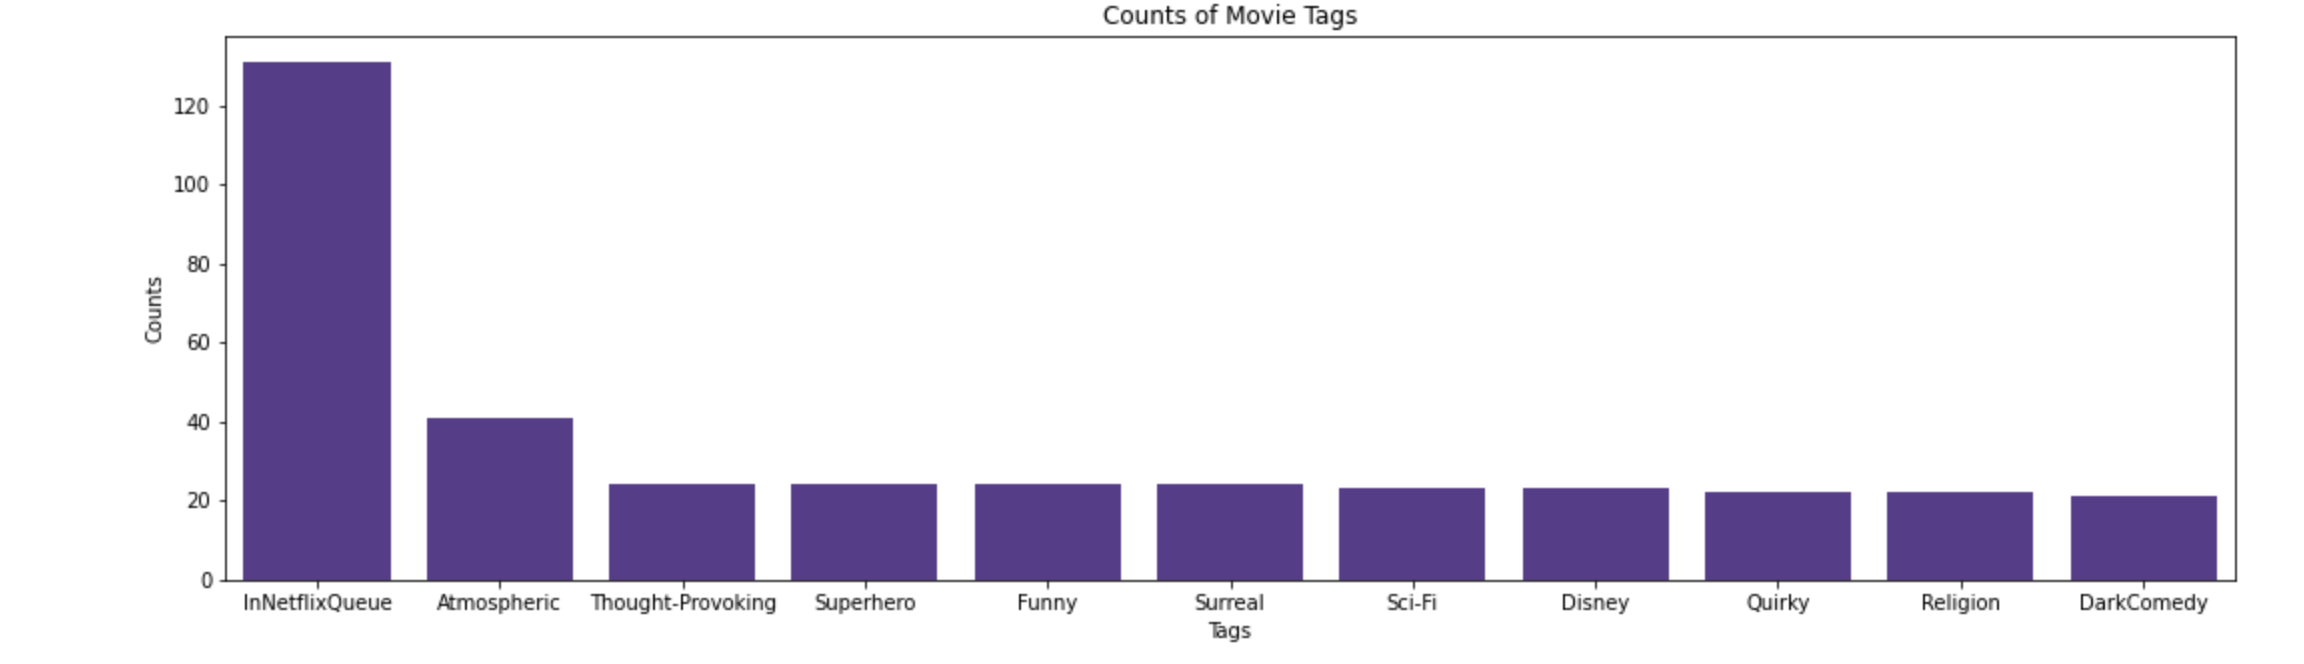 Counts-of-movie-tags.png